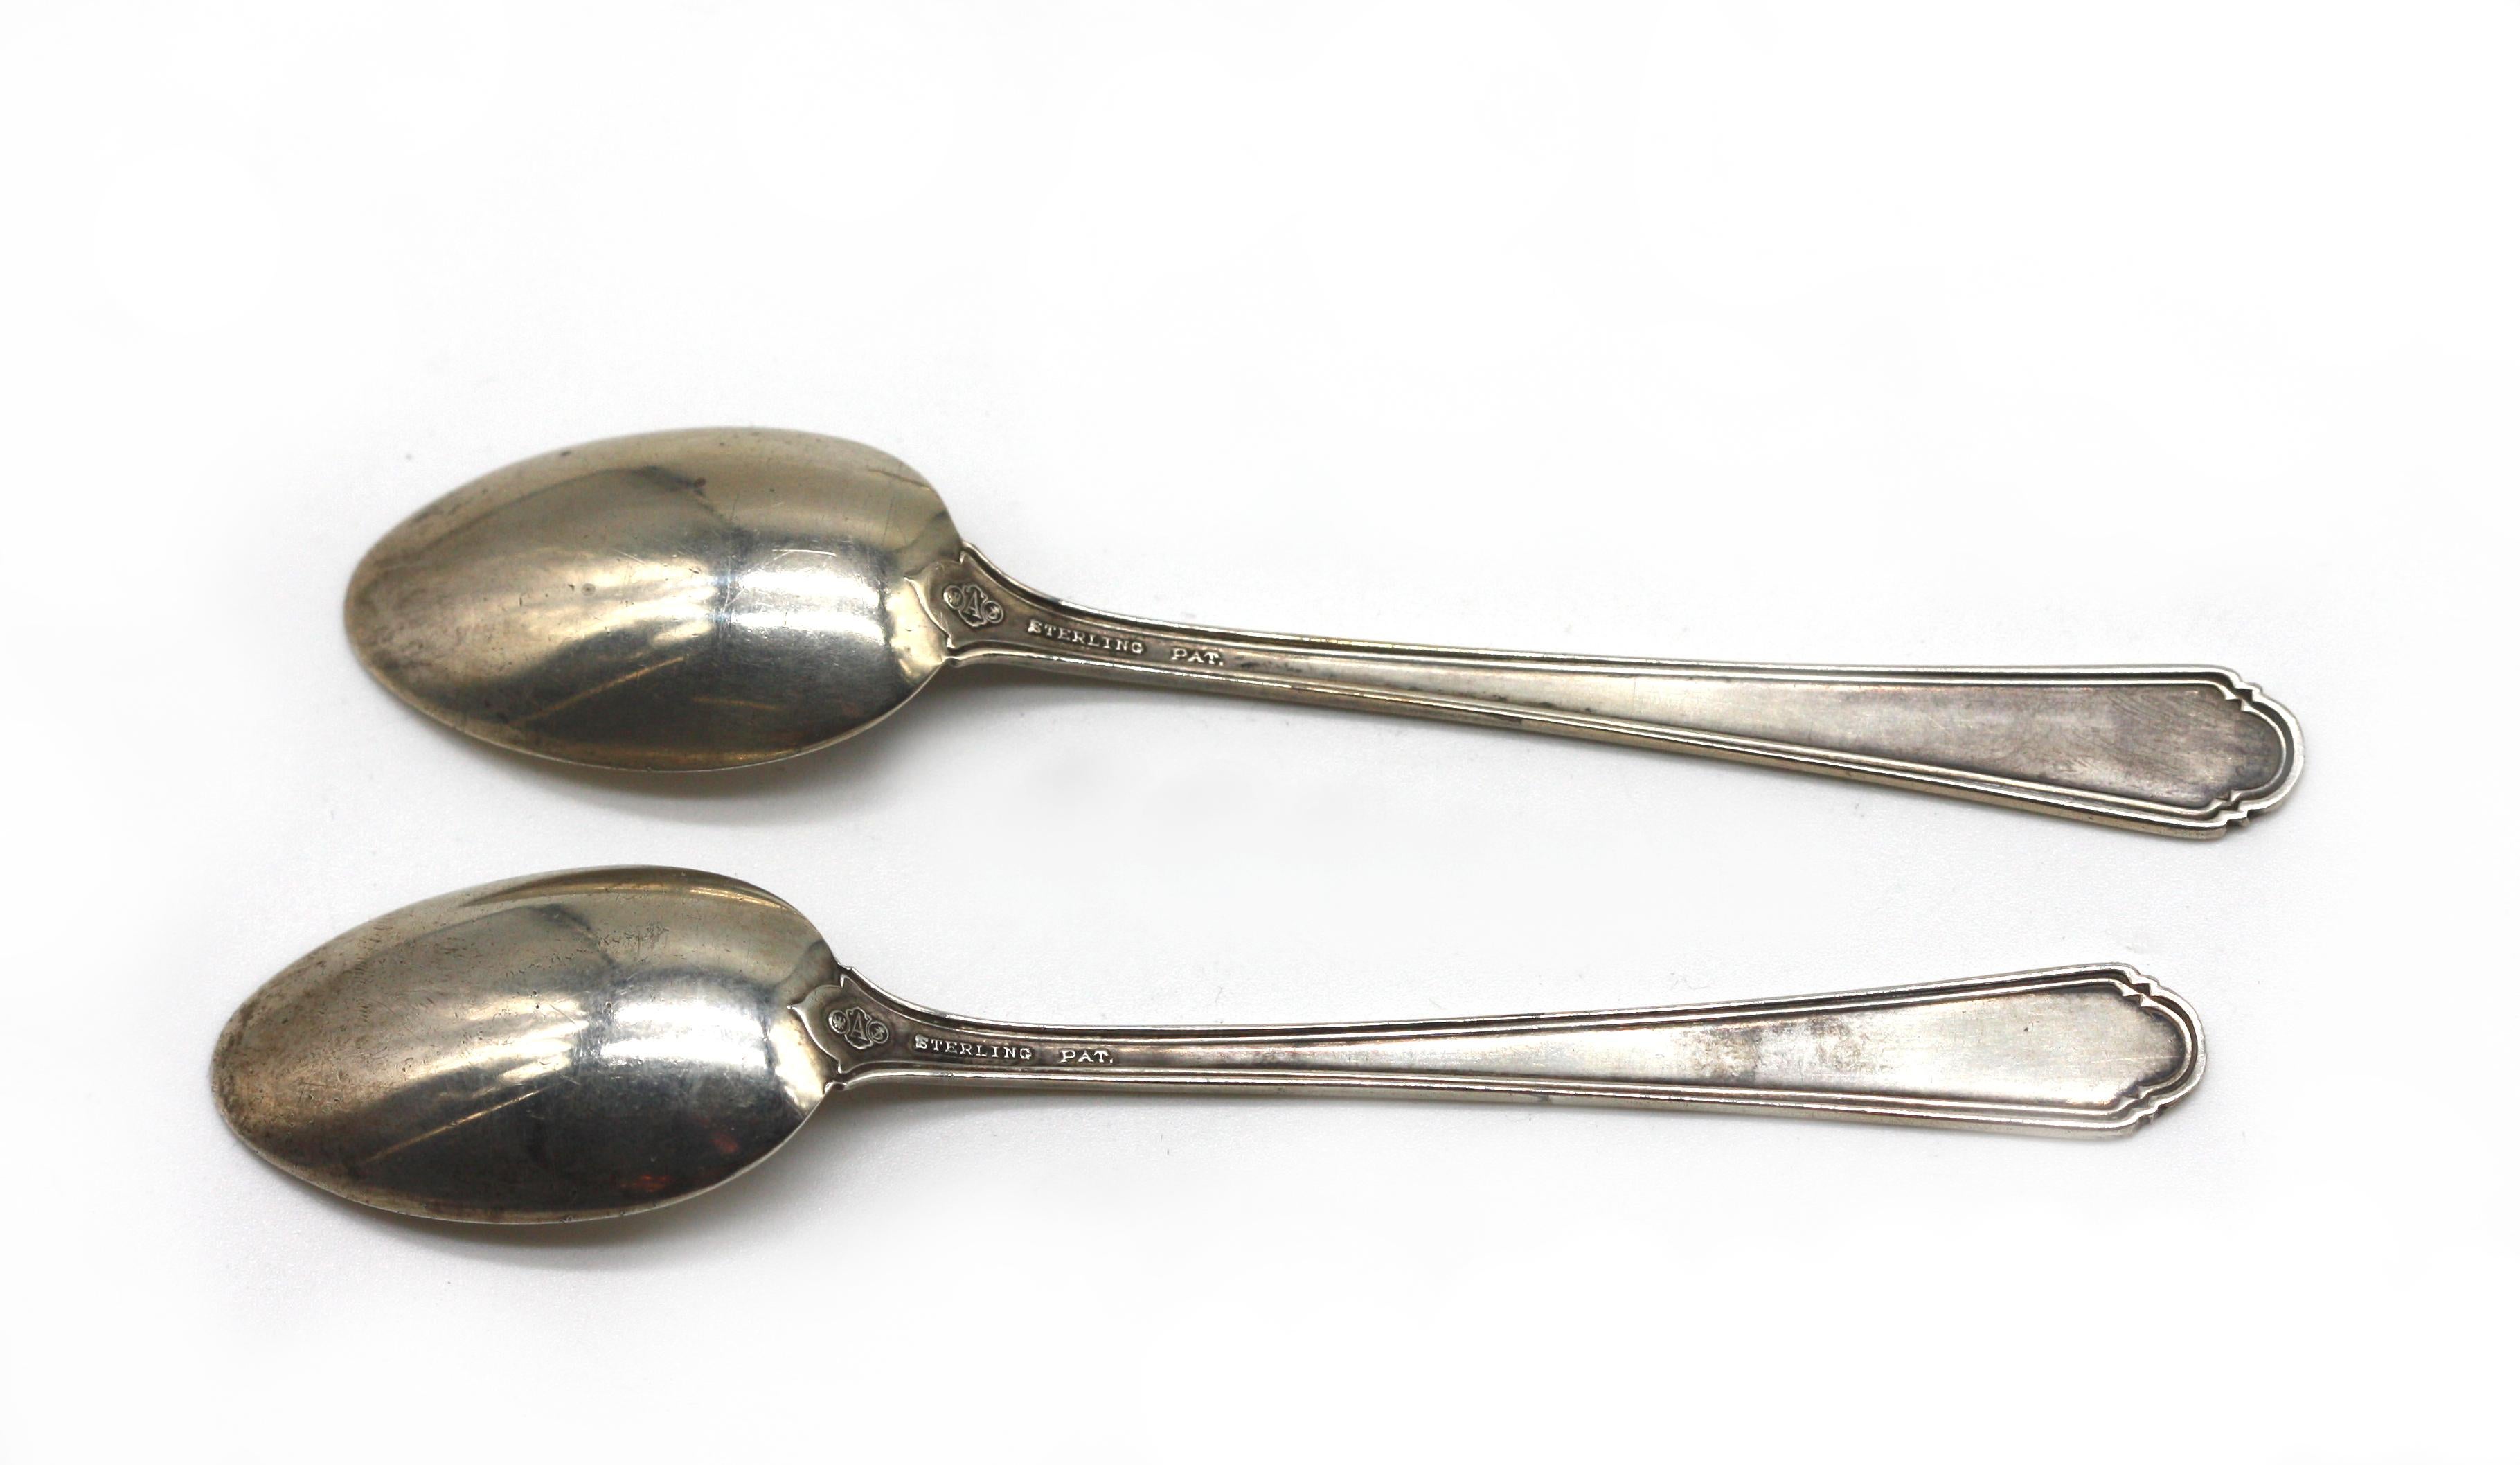 
Set of Nine American Sterling Silver Demi-Tasse Spoons
Circa 1900. Marks for Alvin Silver, with winged eagle and upper case A, Sterling. The handles with thread border headed by a stylized shell. 
Length 4 in. 1.65 oz. troy.